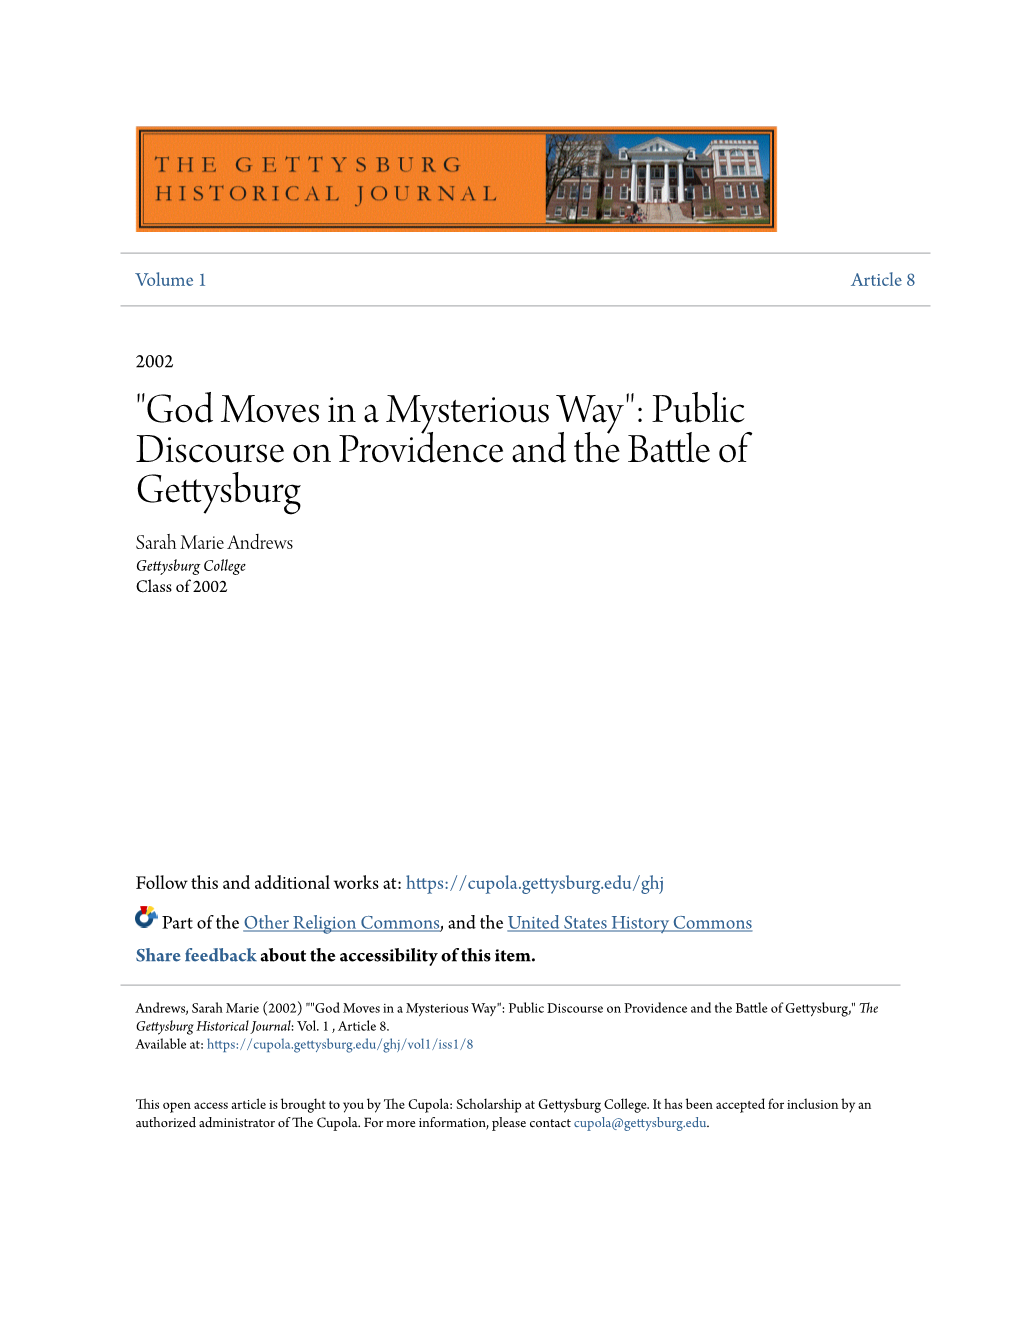 "God Moves in a Mysterious Way": Public Discourse on Providence and the Battle of Gettysburg Sarah Marie Andrews Gettysburg College Class of 2002